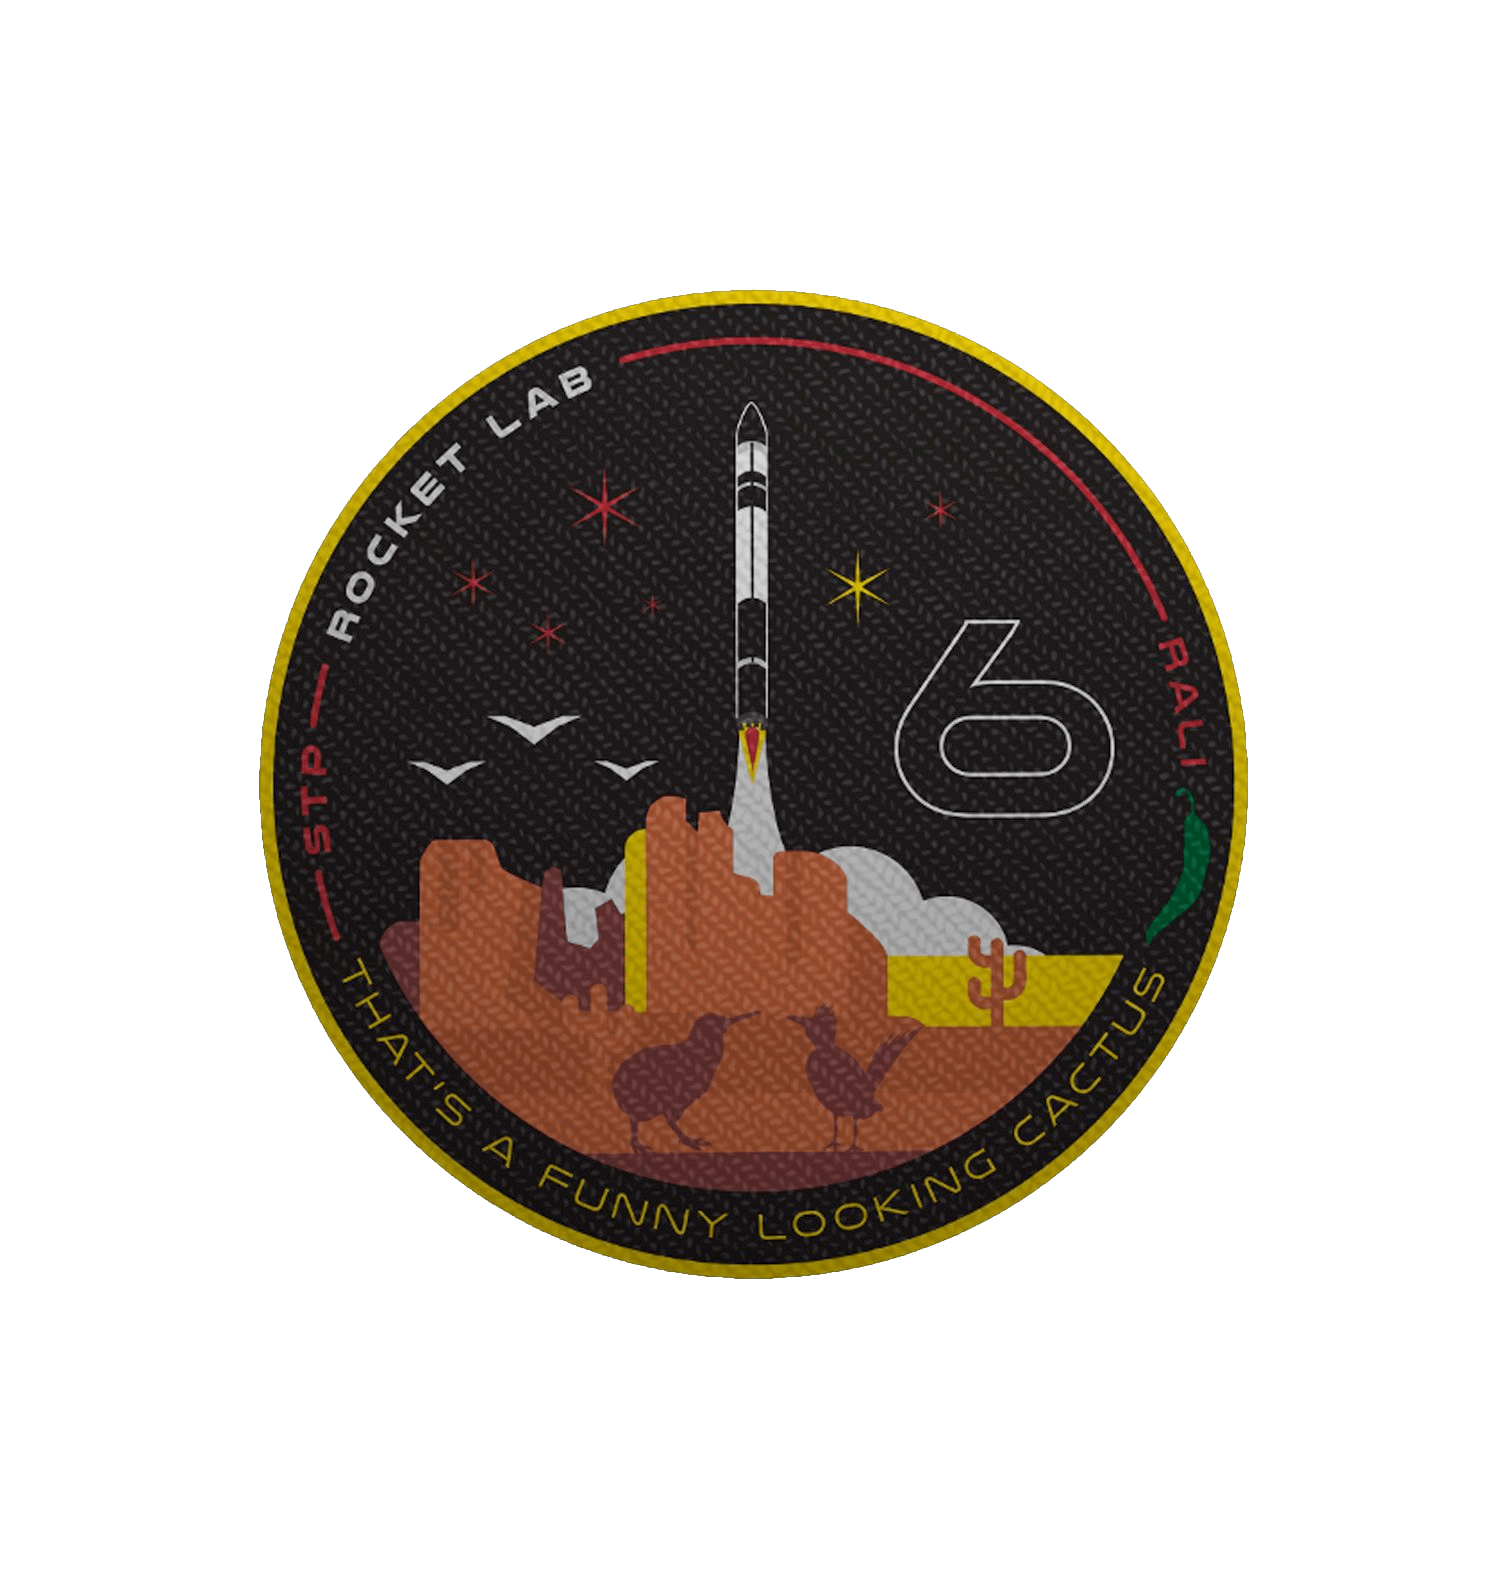 Mission patch for STP-27RD